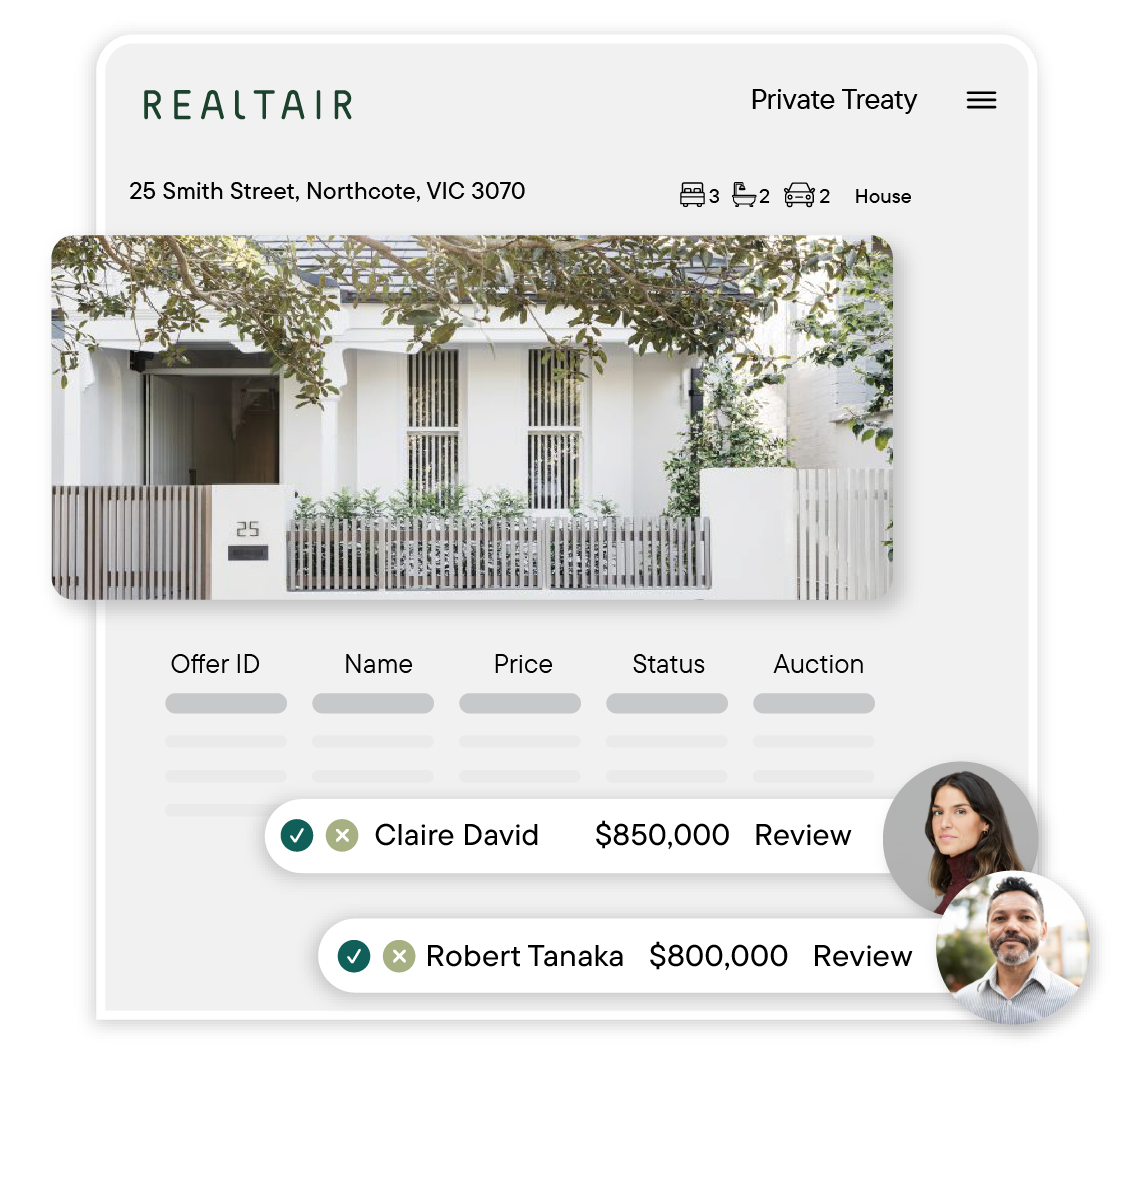 Realtair-Sell_Private-treaty-listing